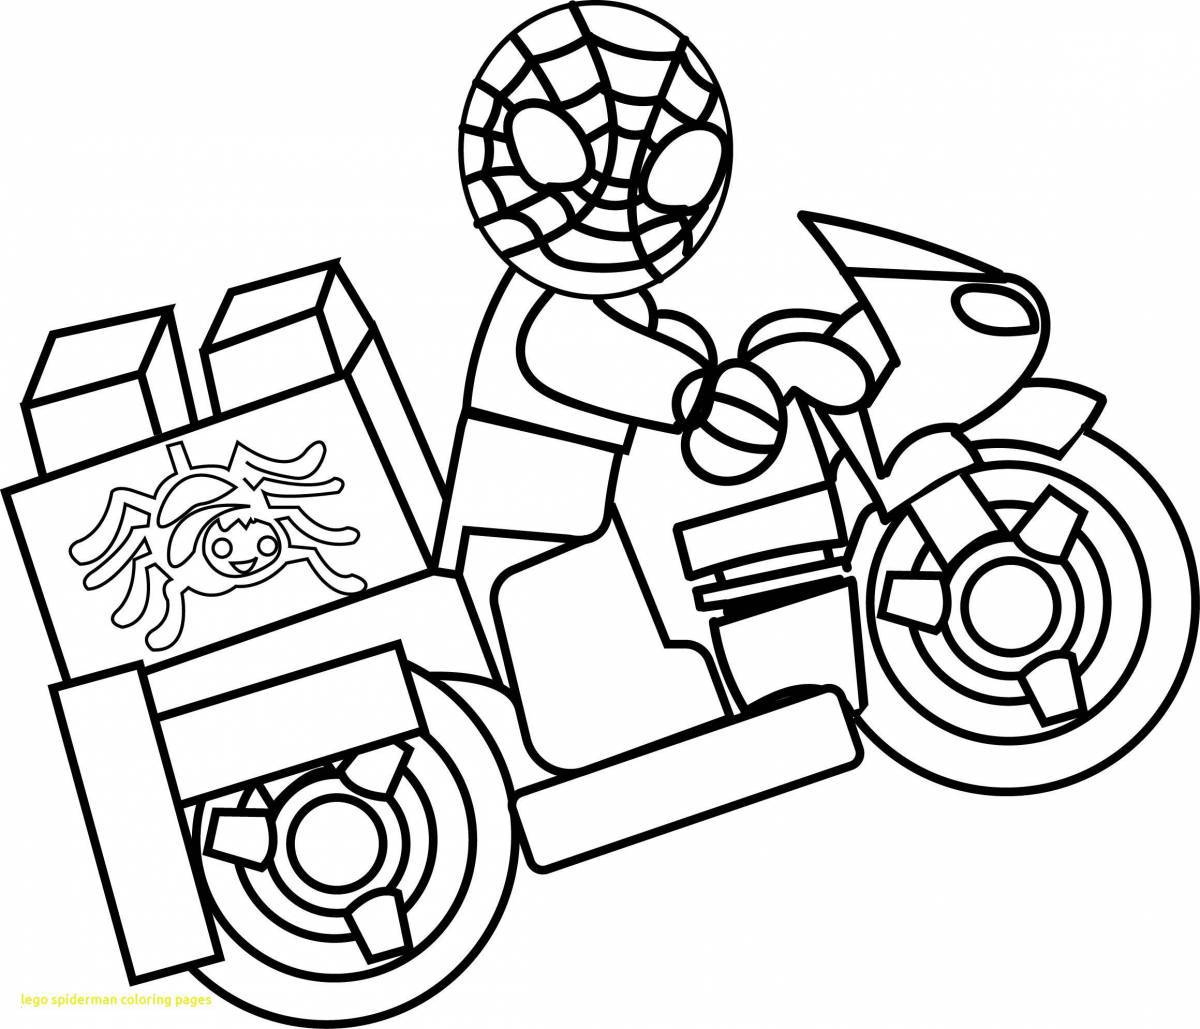 Amazing lego spiderman coloring page